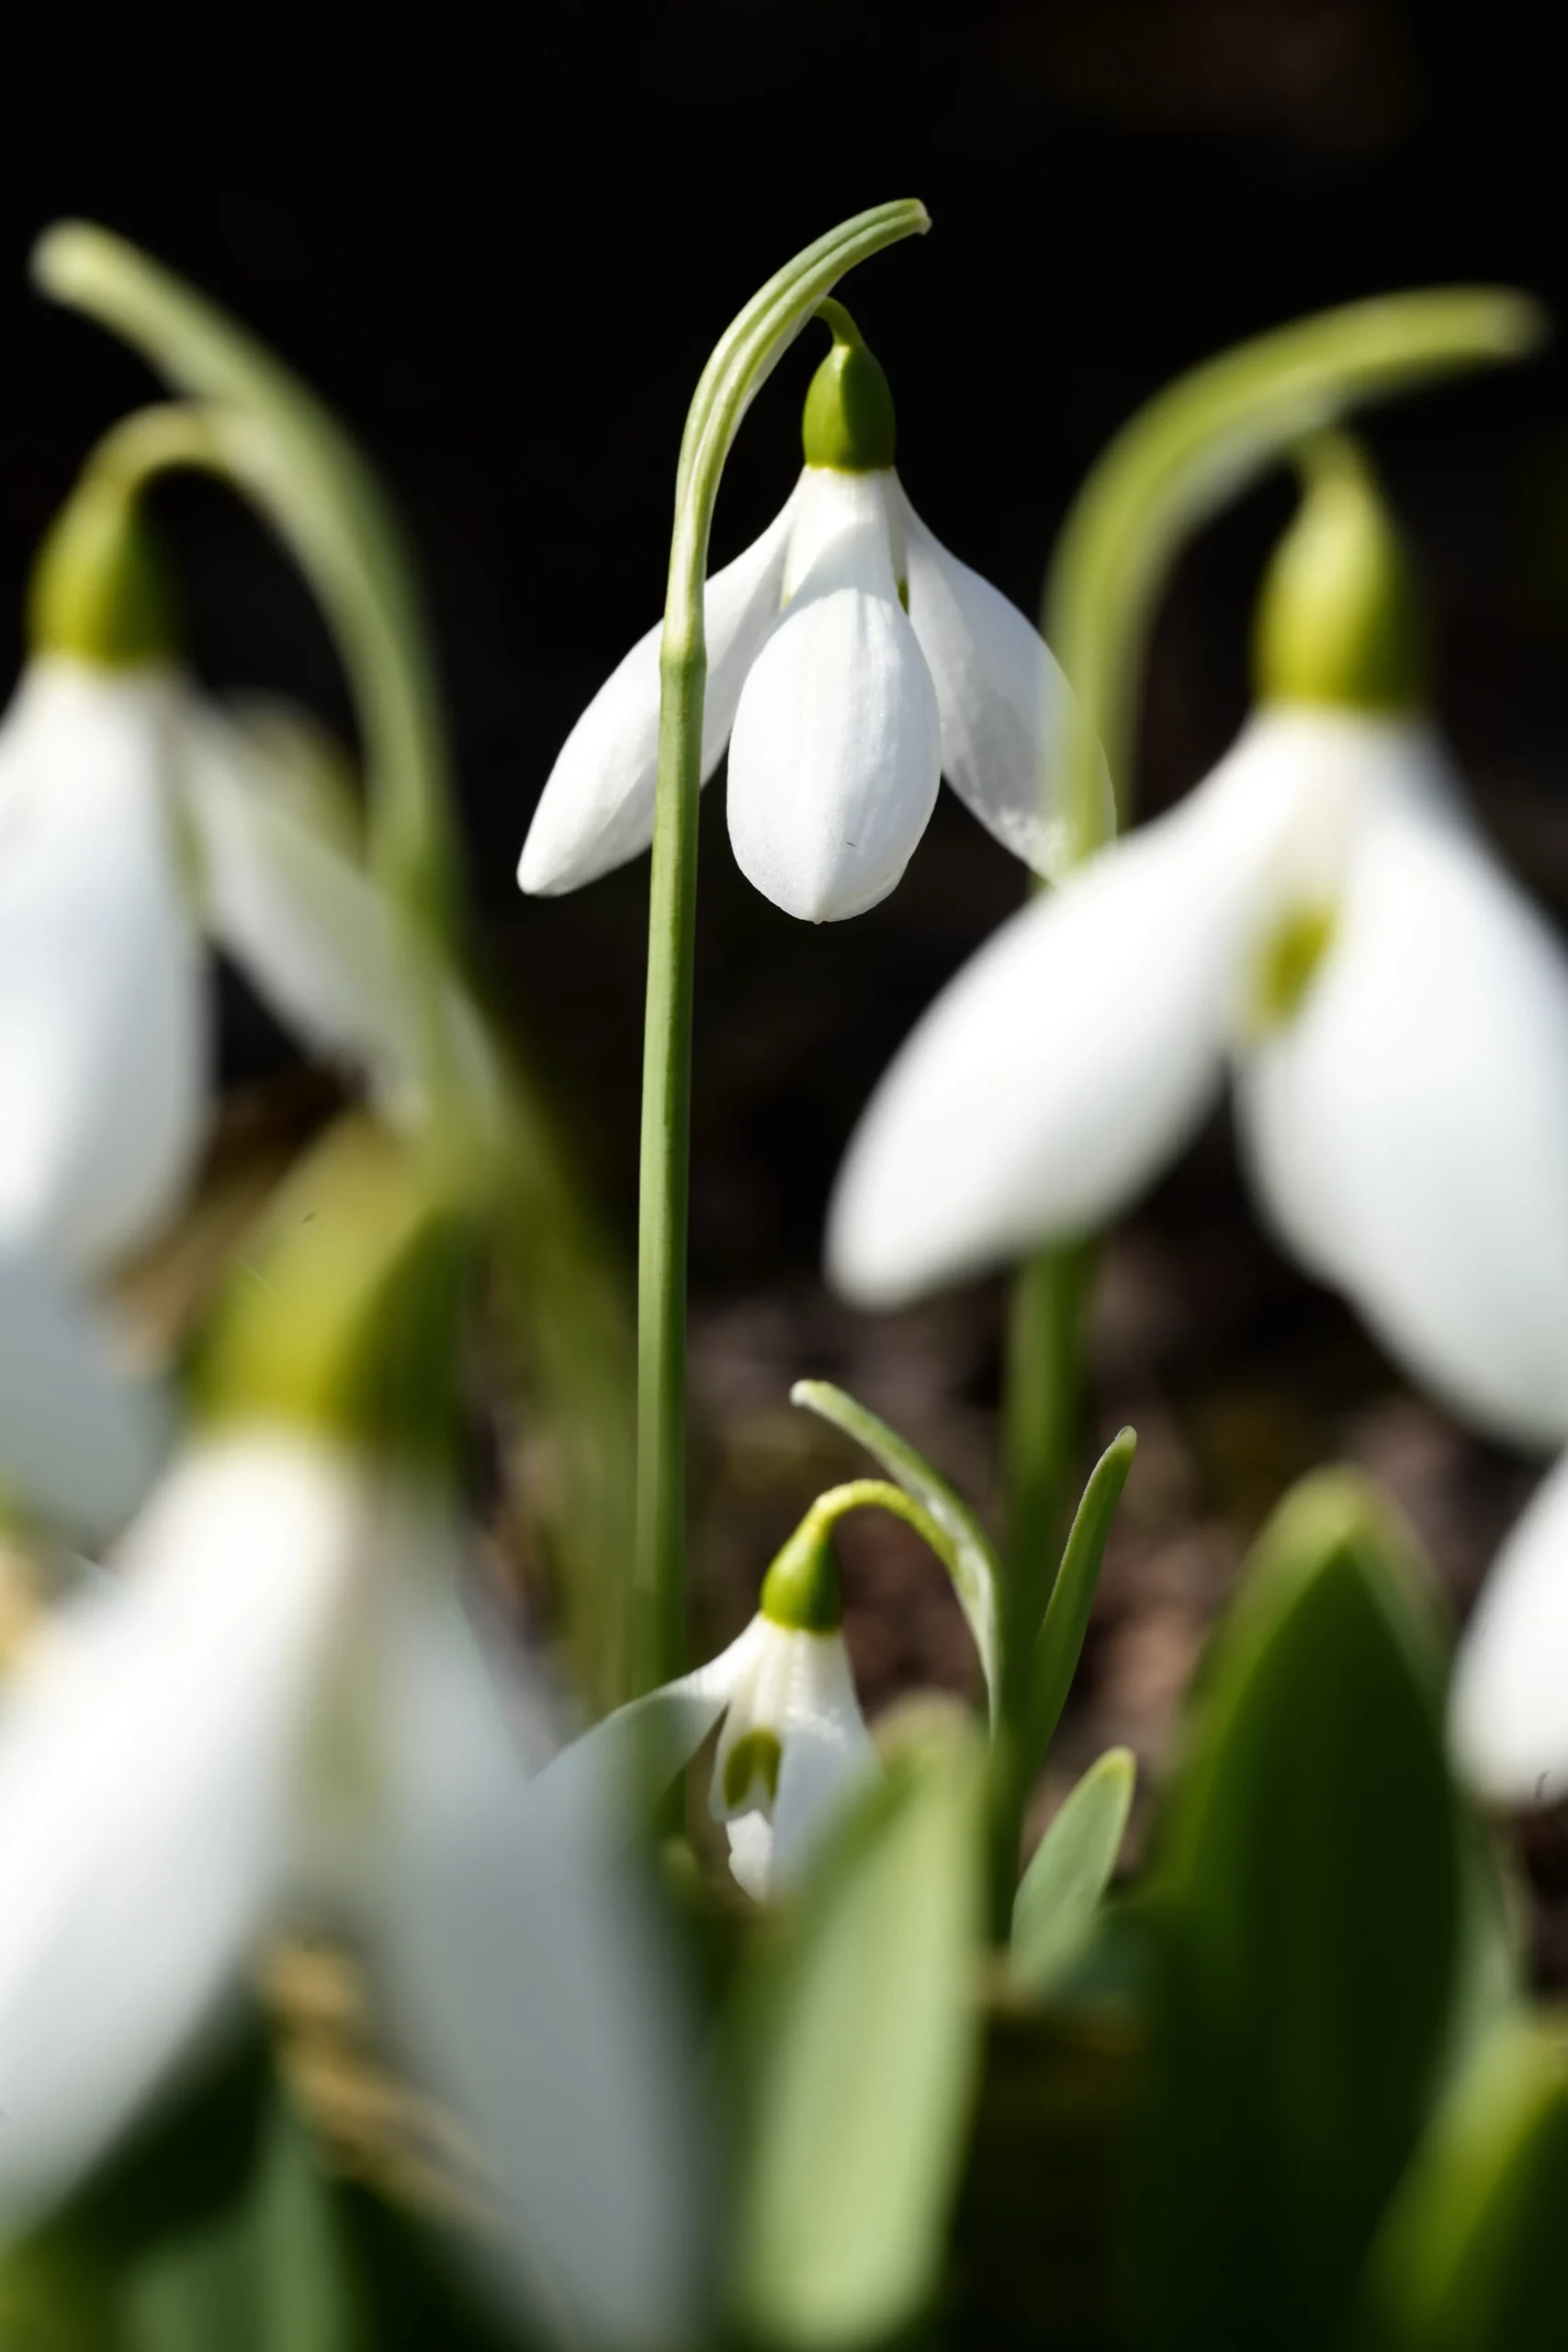 Snowdrop flower; Disorders Treated at the Kahm Center for Eating disorders